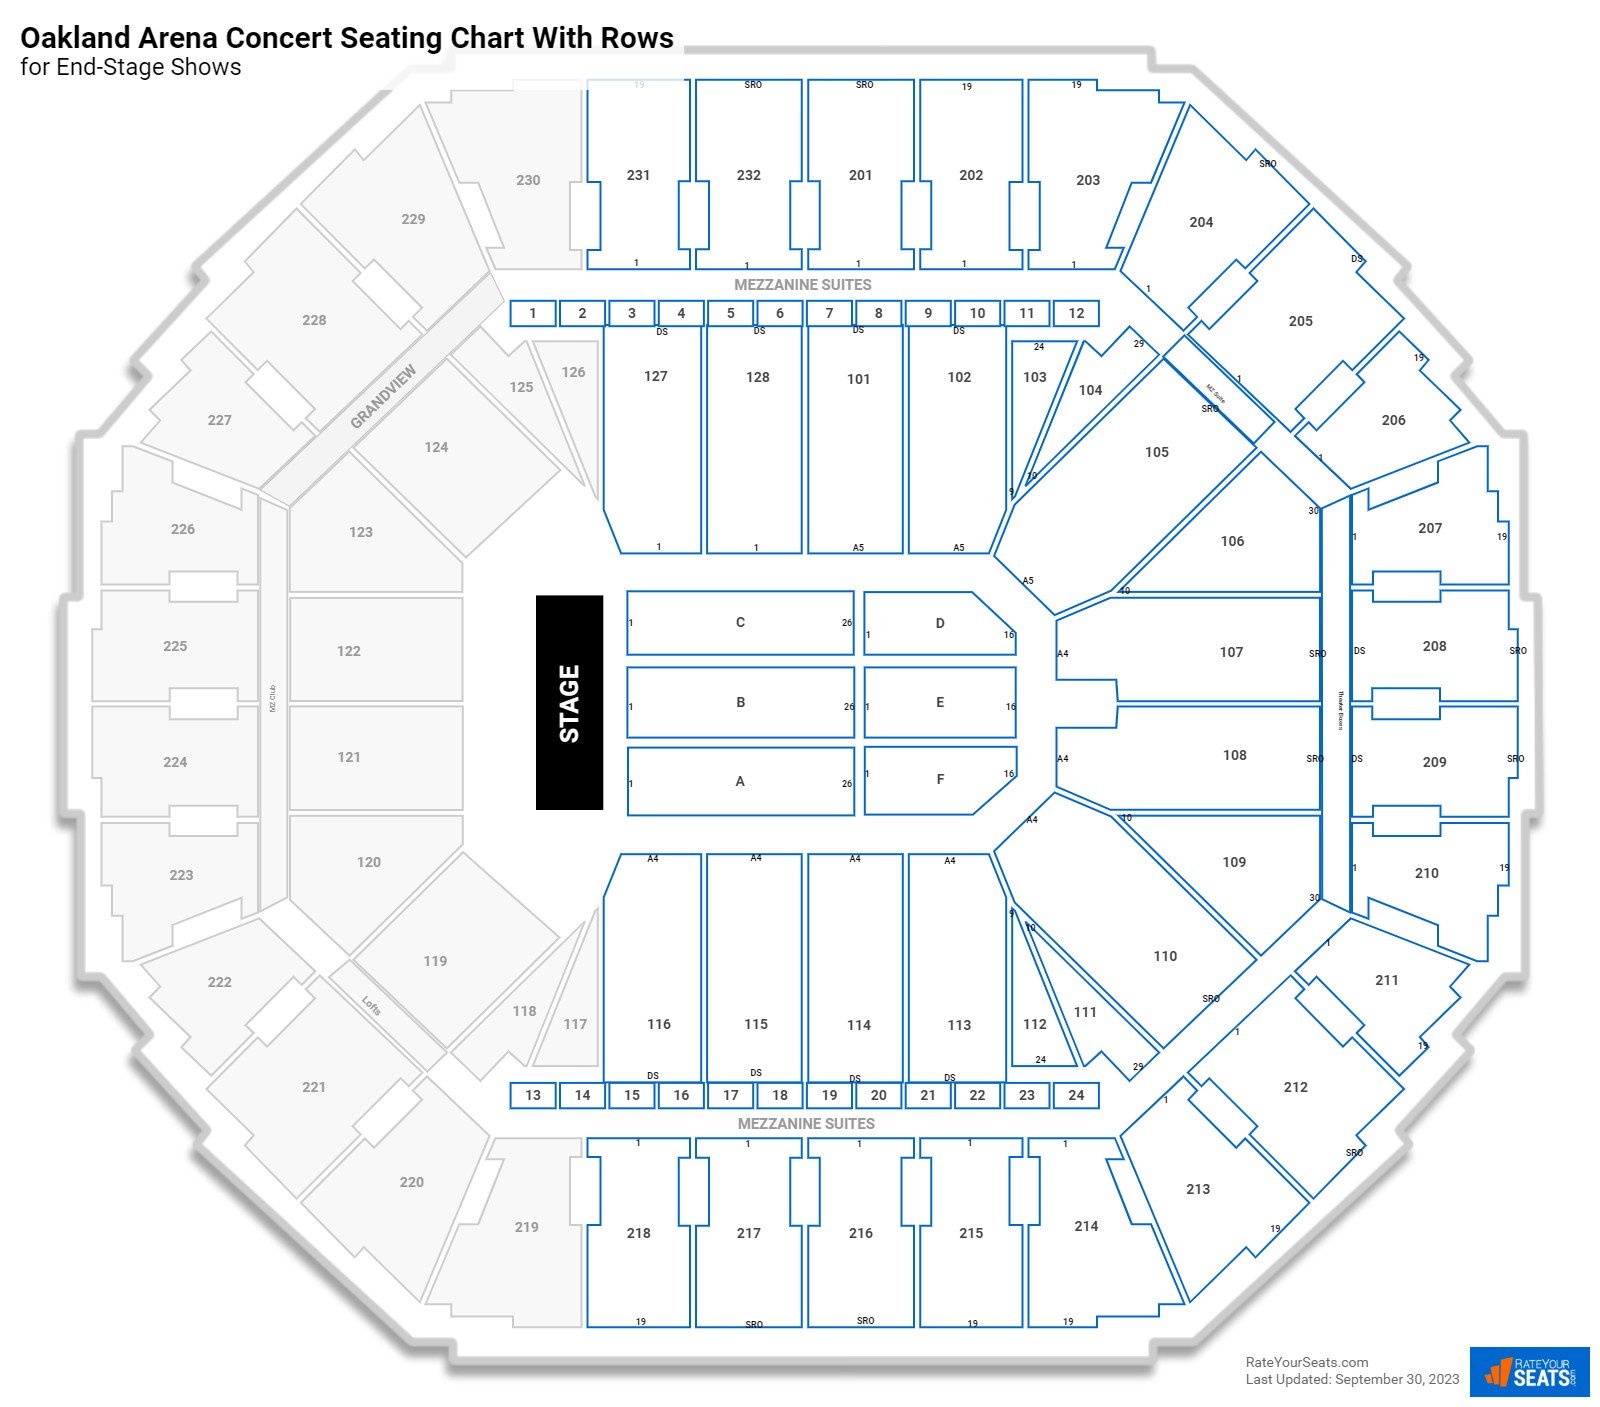 Oakland Arena seating chart with row numbers